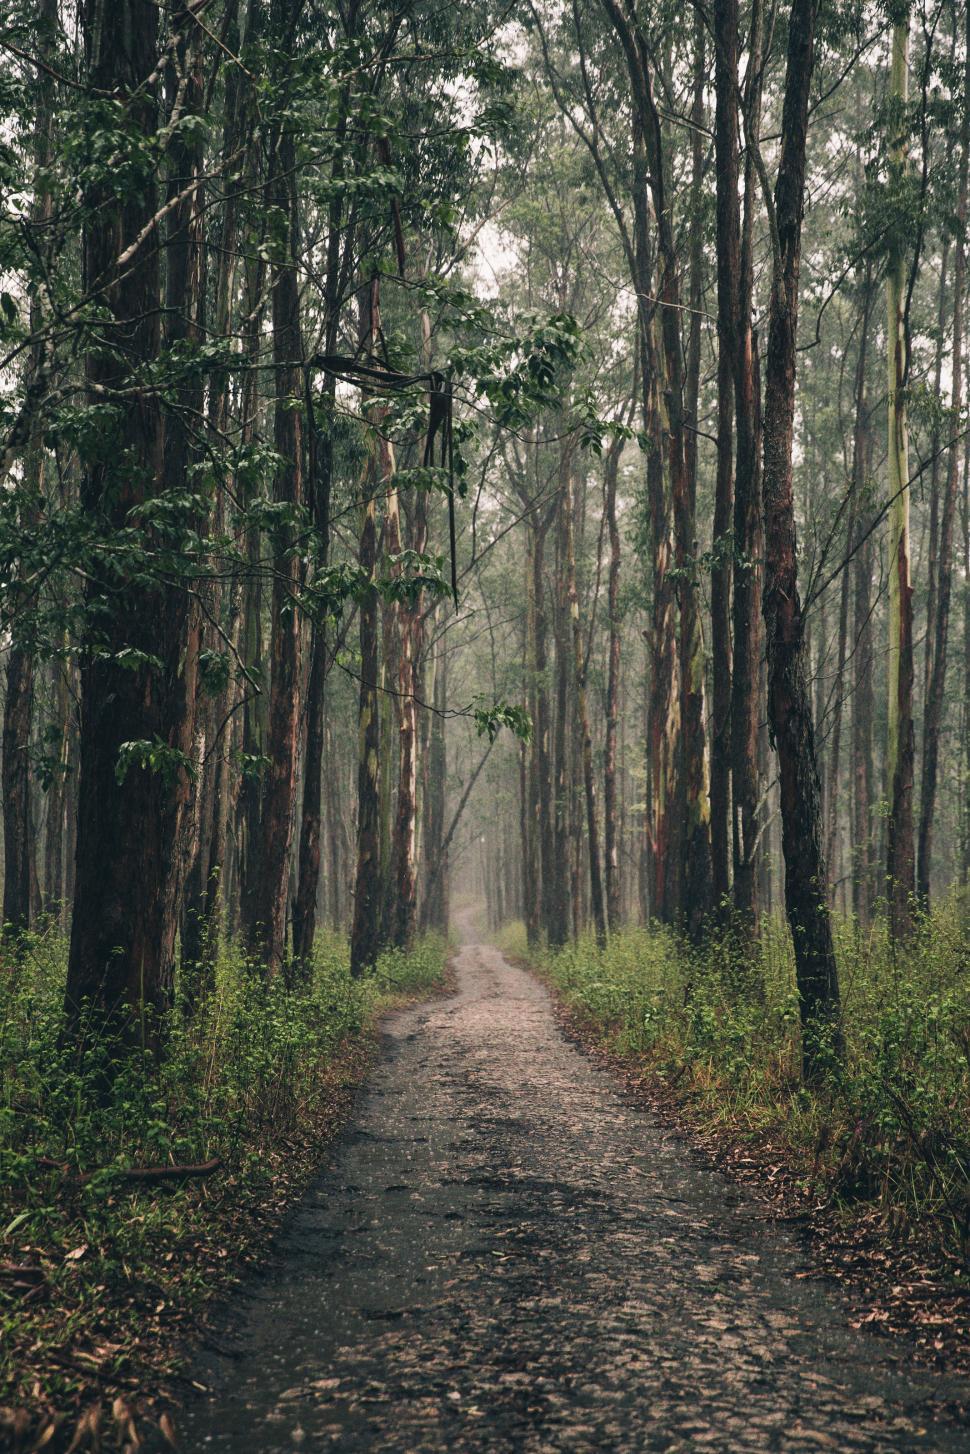 Download Free Stock Photo of A path in the forest 